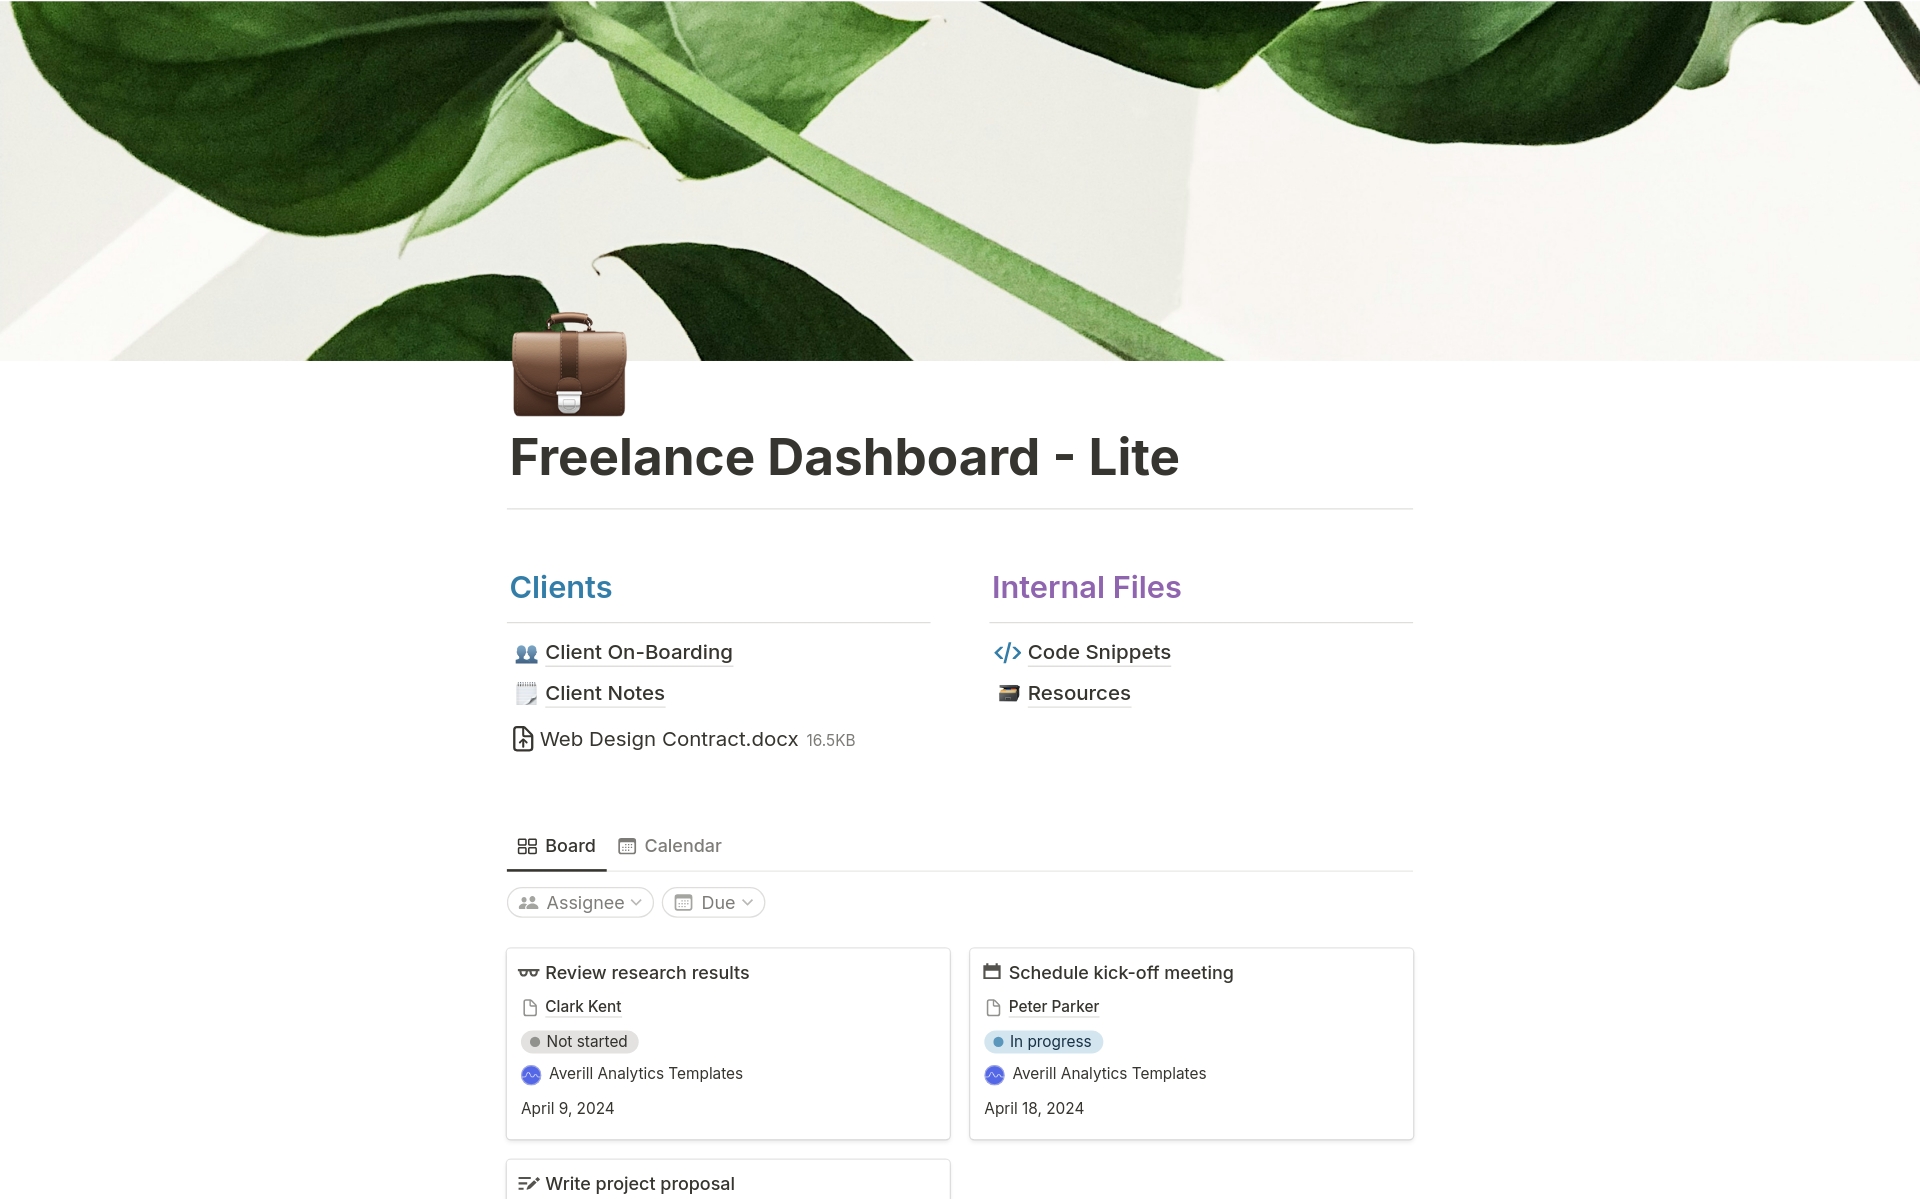 Your home for managing a growing freelance business. 